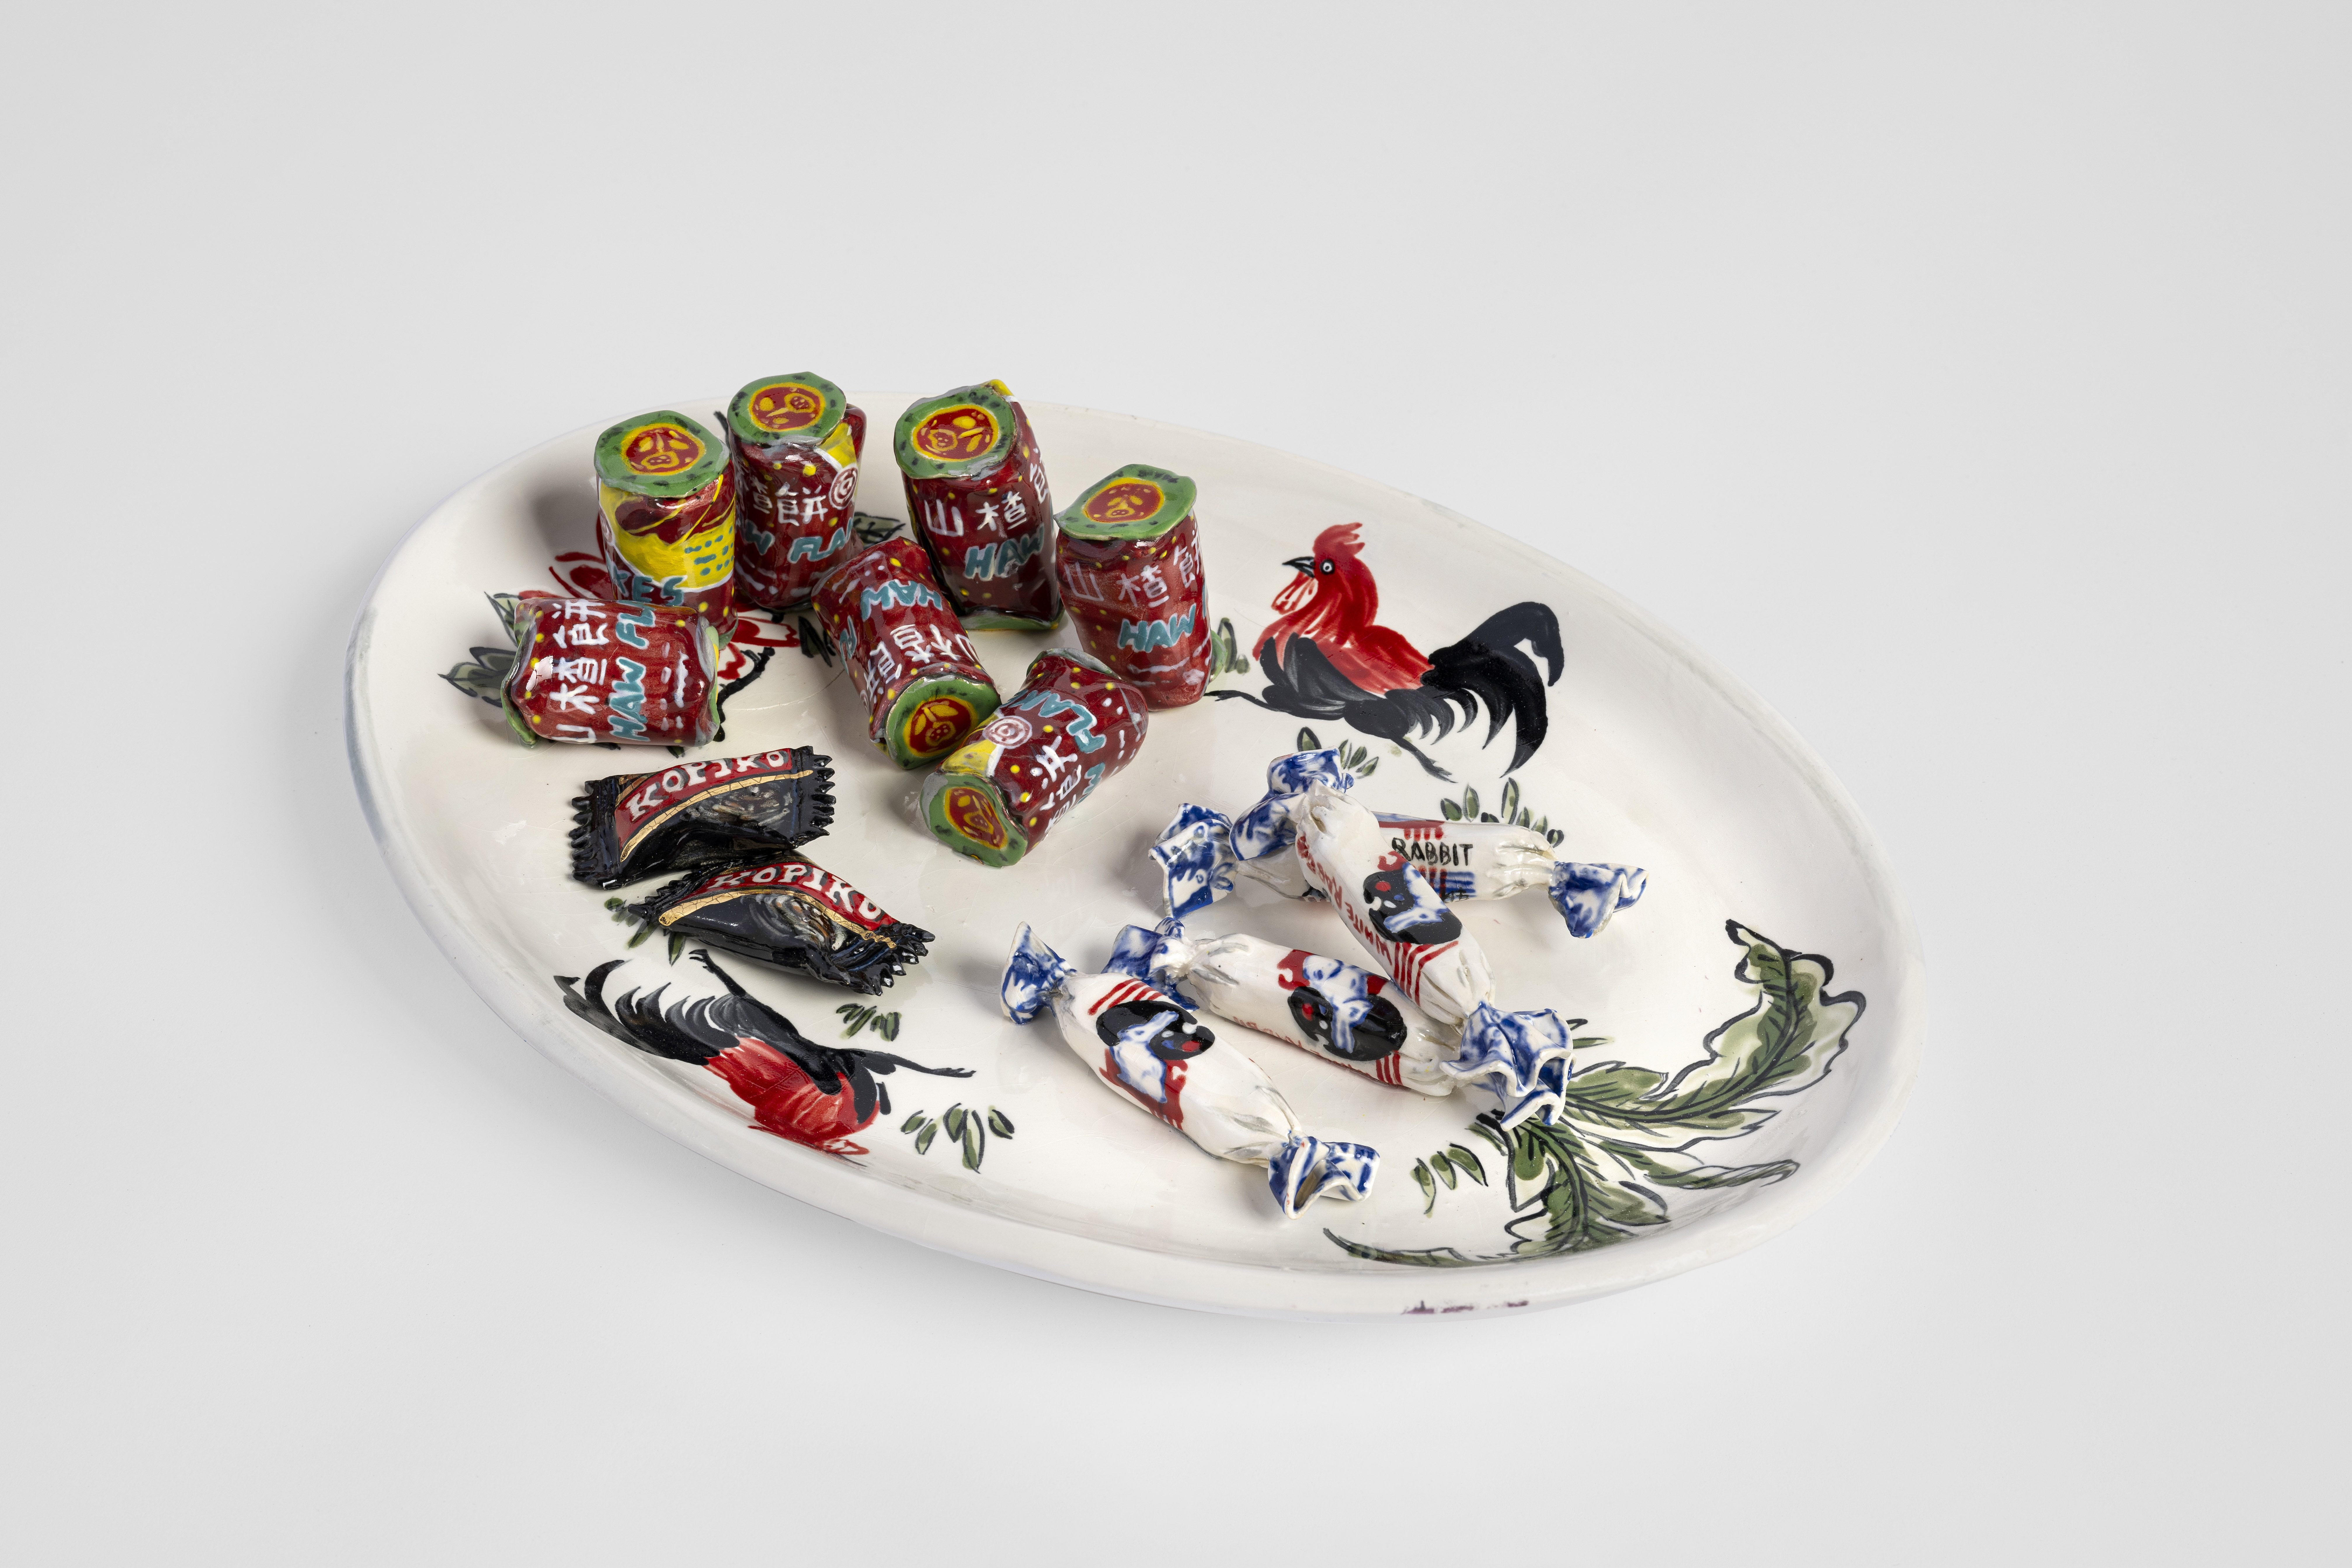 MBOU54_Bounpraseuth_Rooster Plate with Haw Haw Kopiko and White Rabbit Candy_2023_glazed earthenware and gold lustre